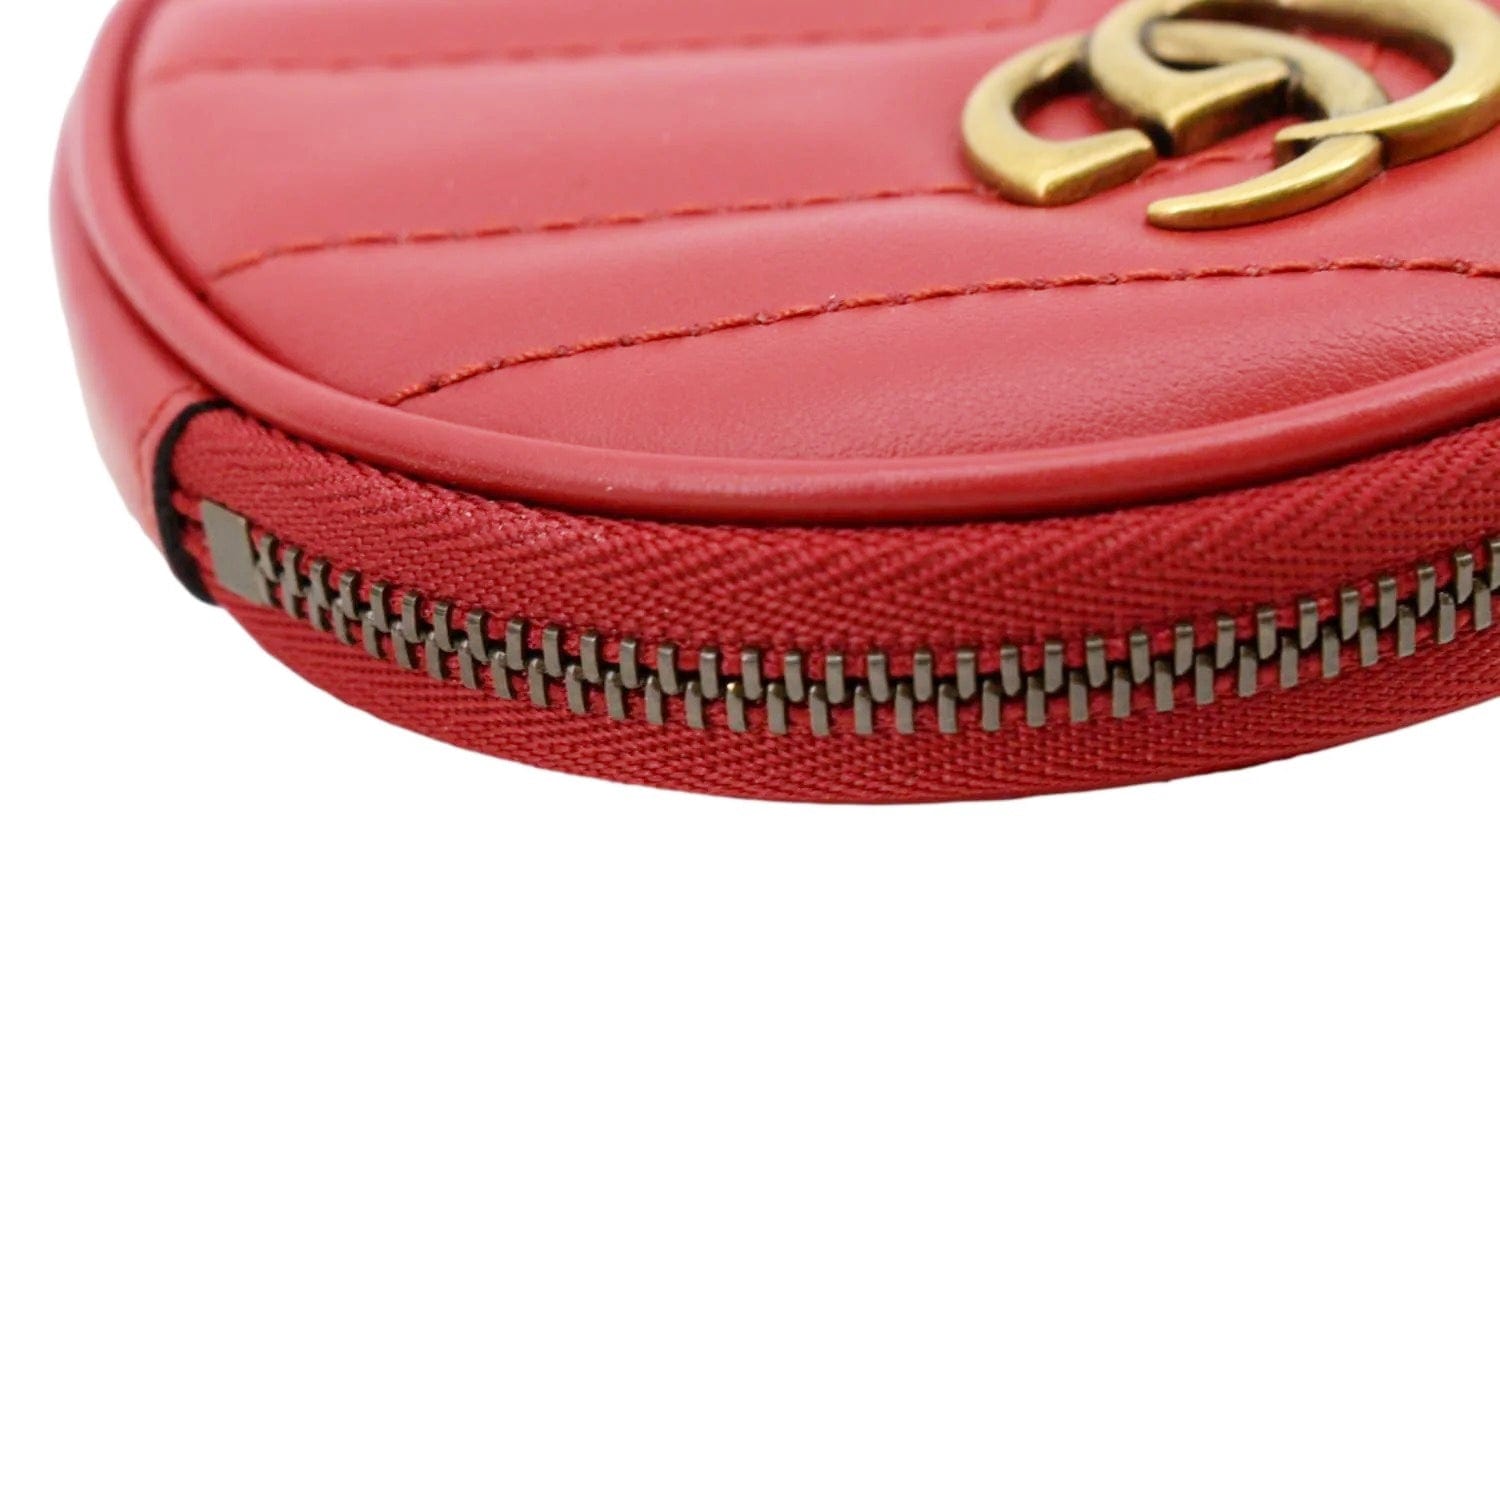 GUCCI GG Marmont Mini Round Leather Coin Purse Red 575160